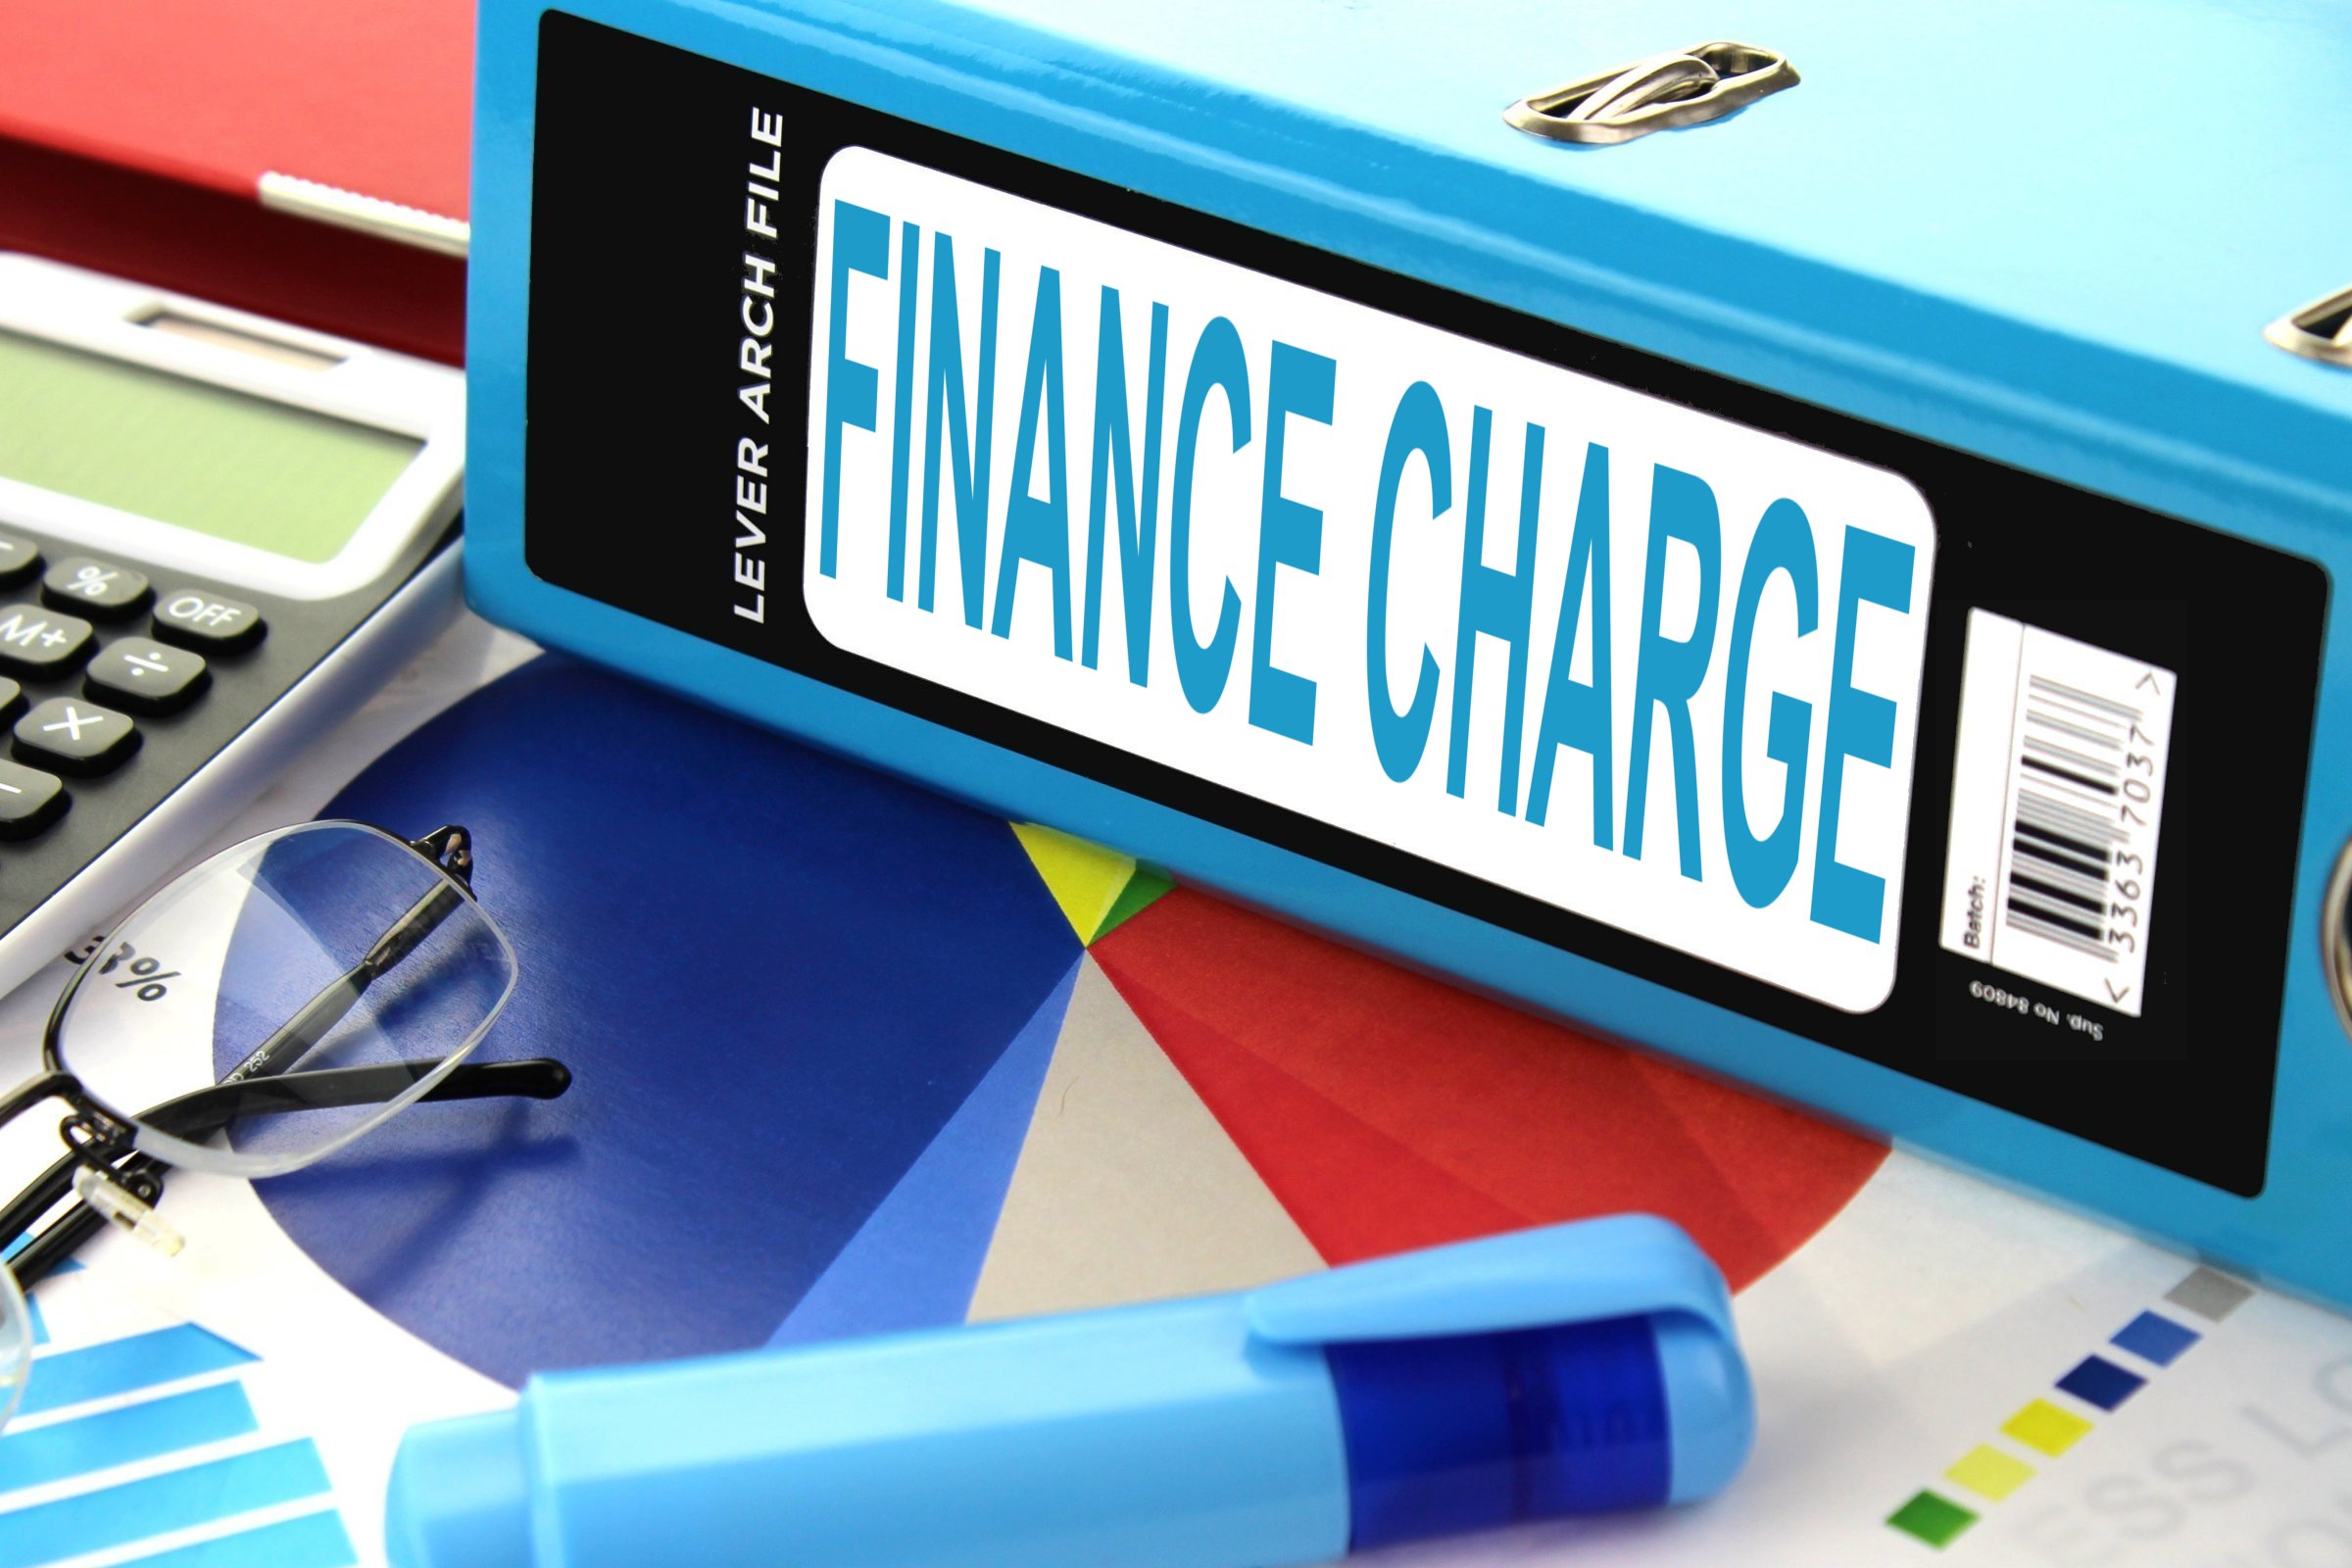 Finance Charge Free Of Charge Creative Commons Lever Arch File Image 